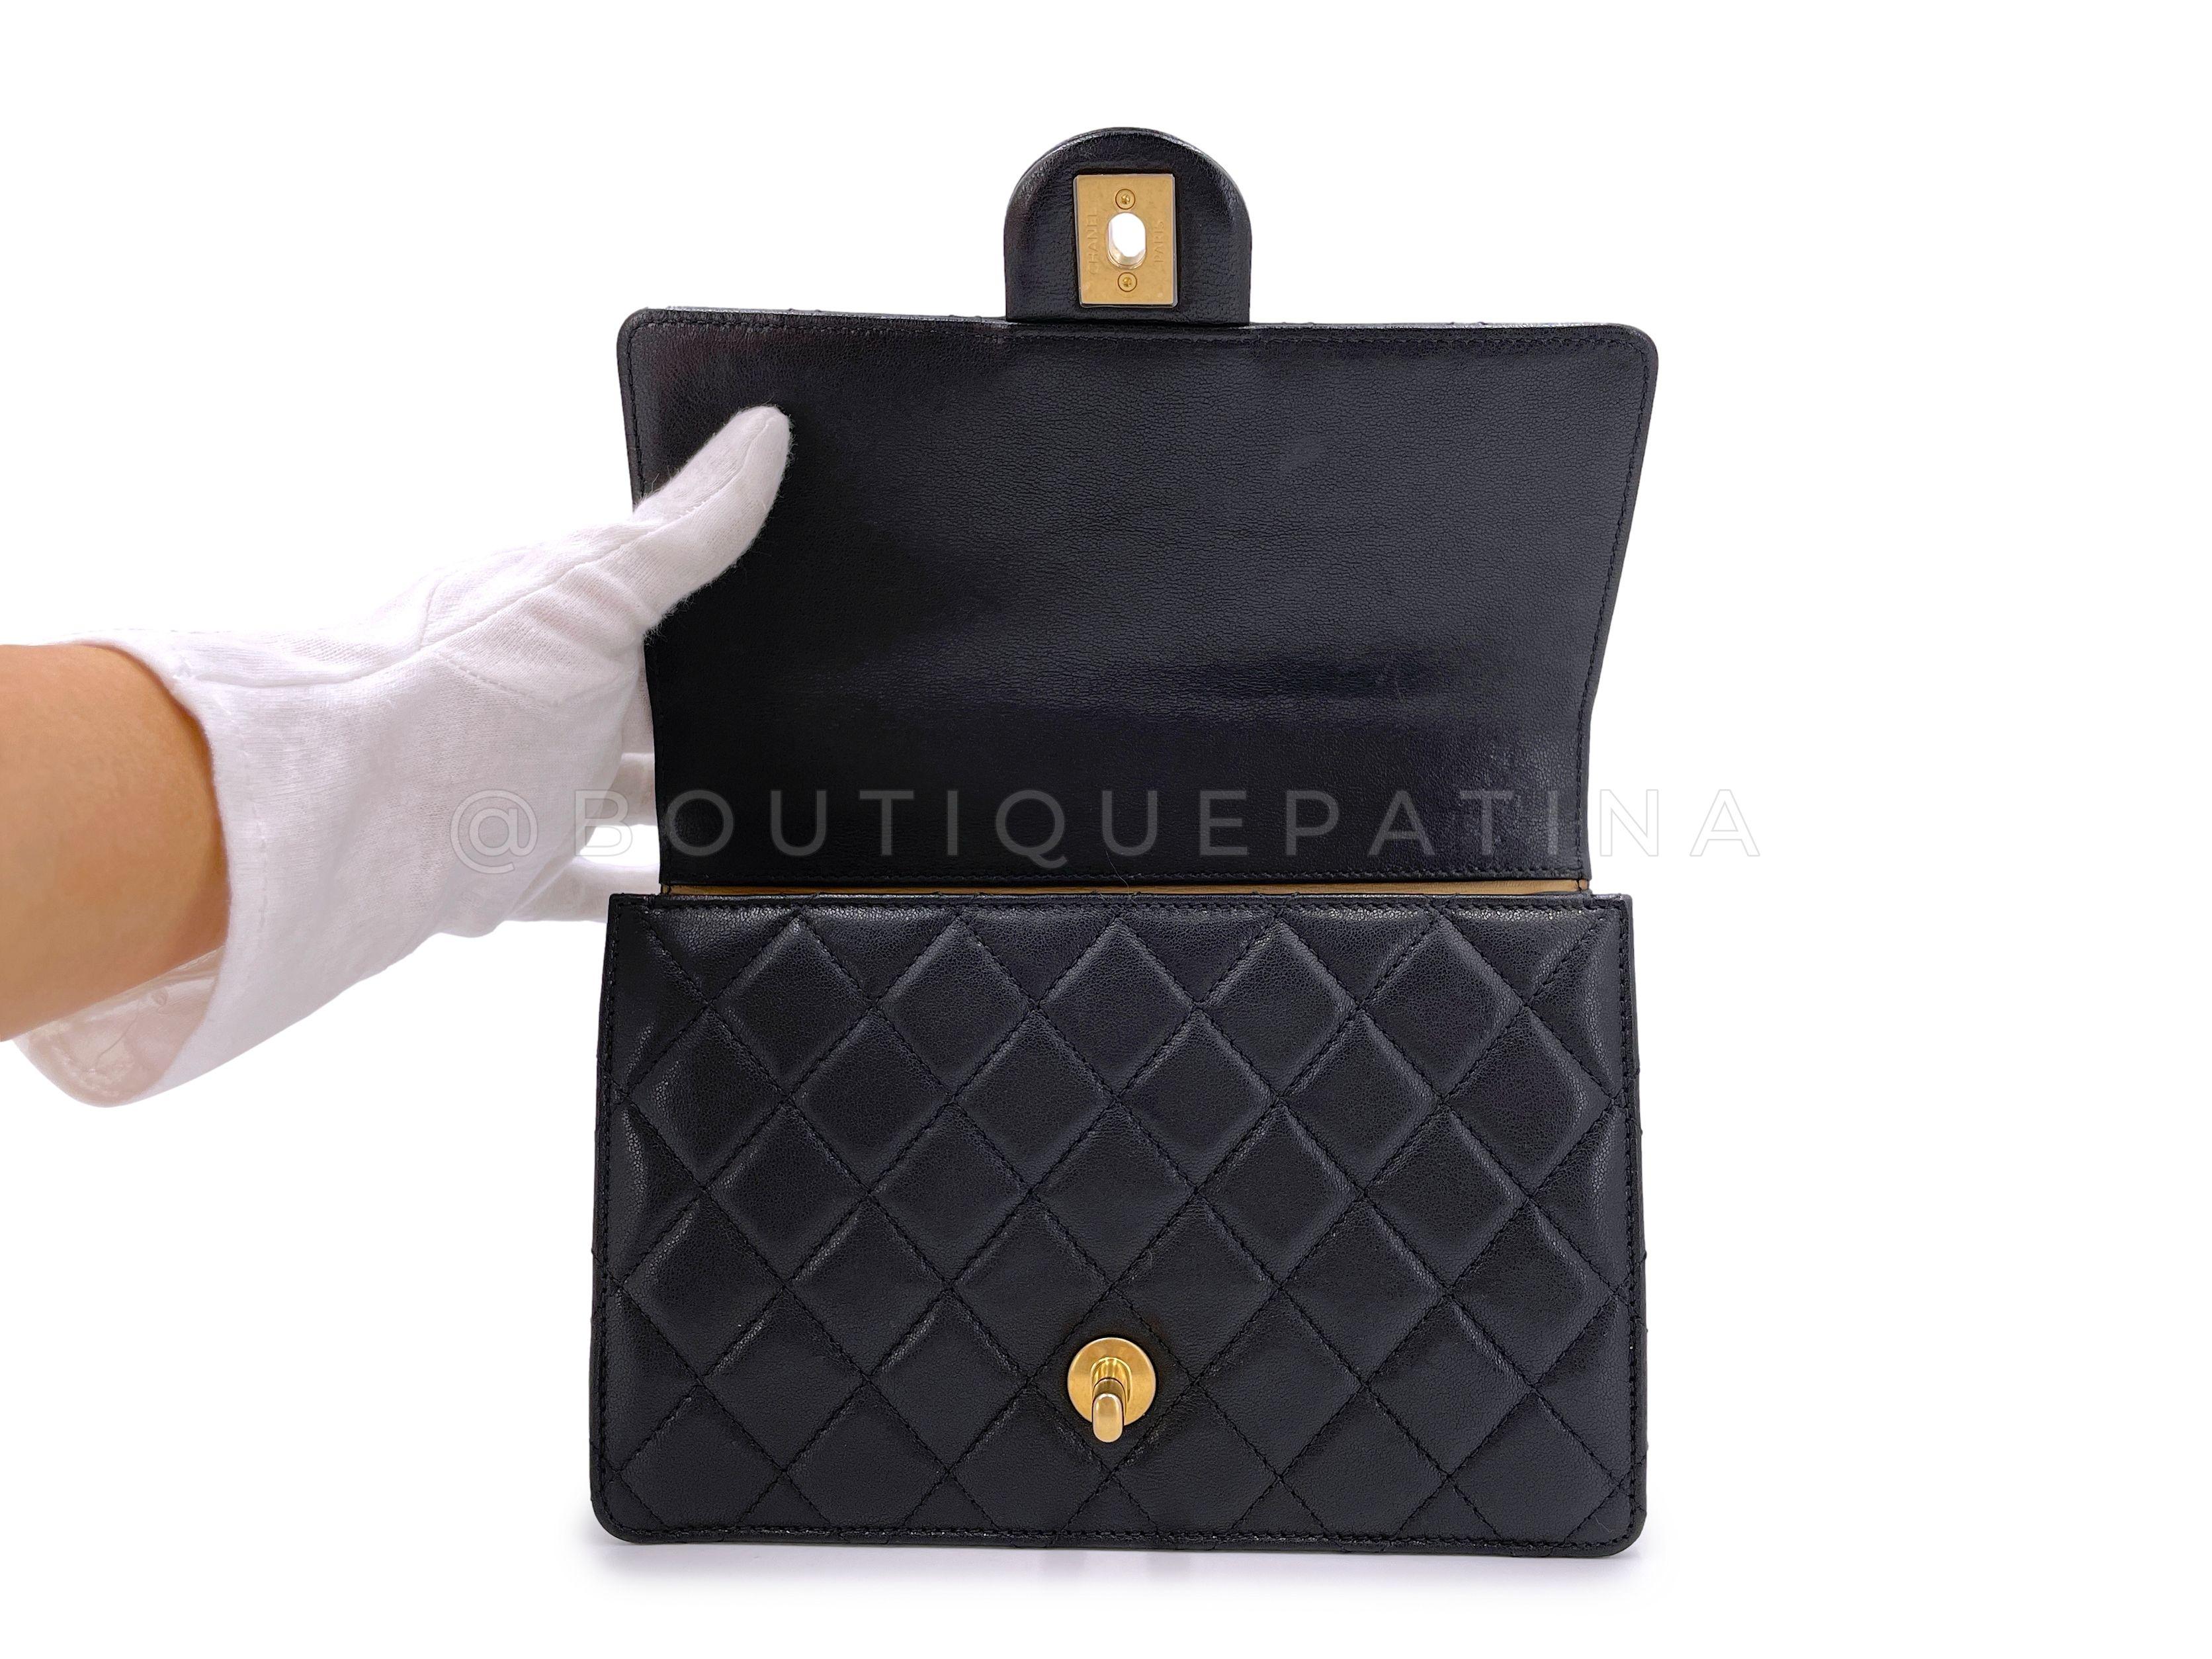 Pristine 19S Chanel Chic Pearls Quilted Flap Bag Black GHW 66675 For Sale 4